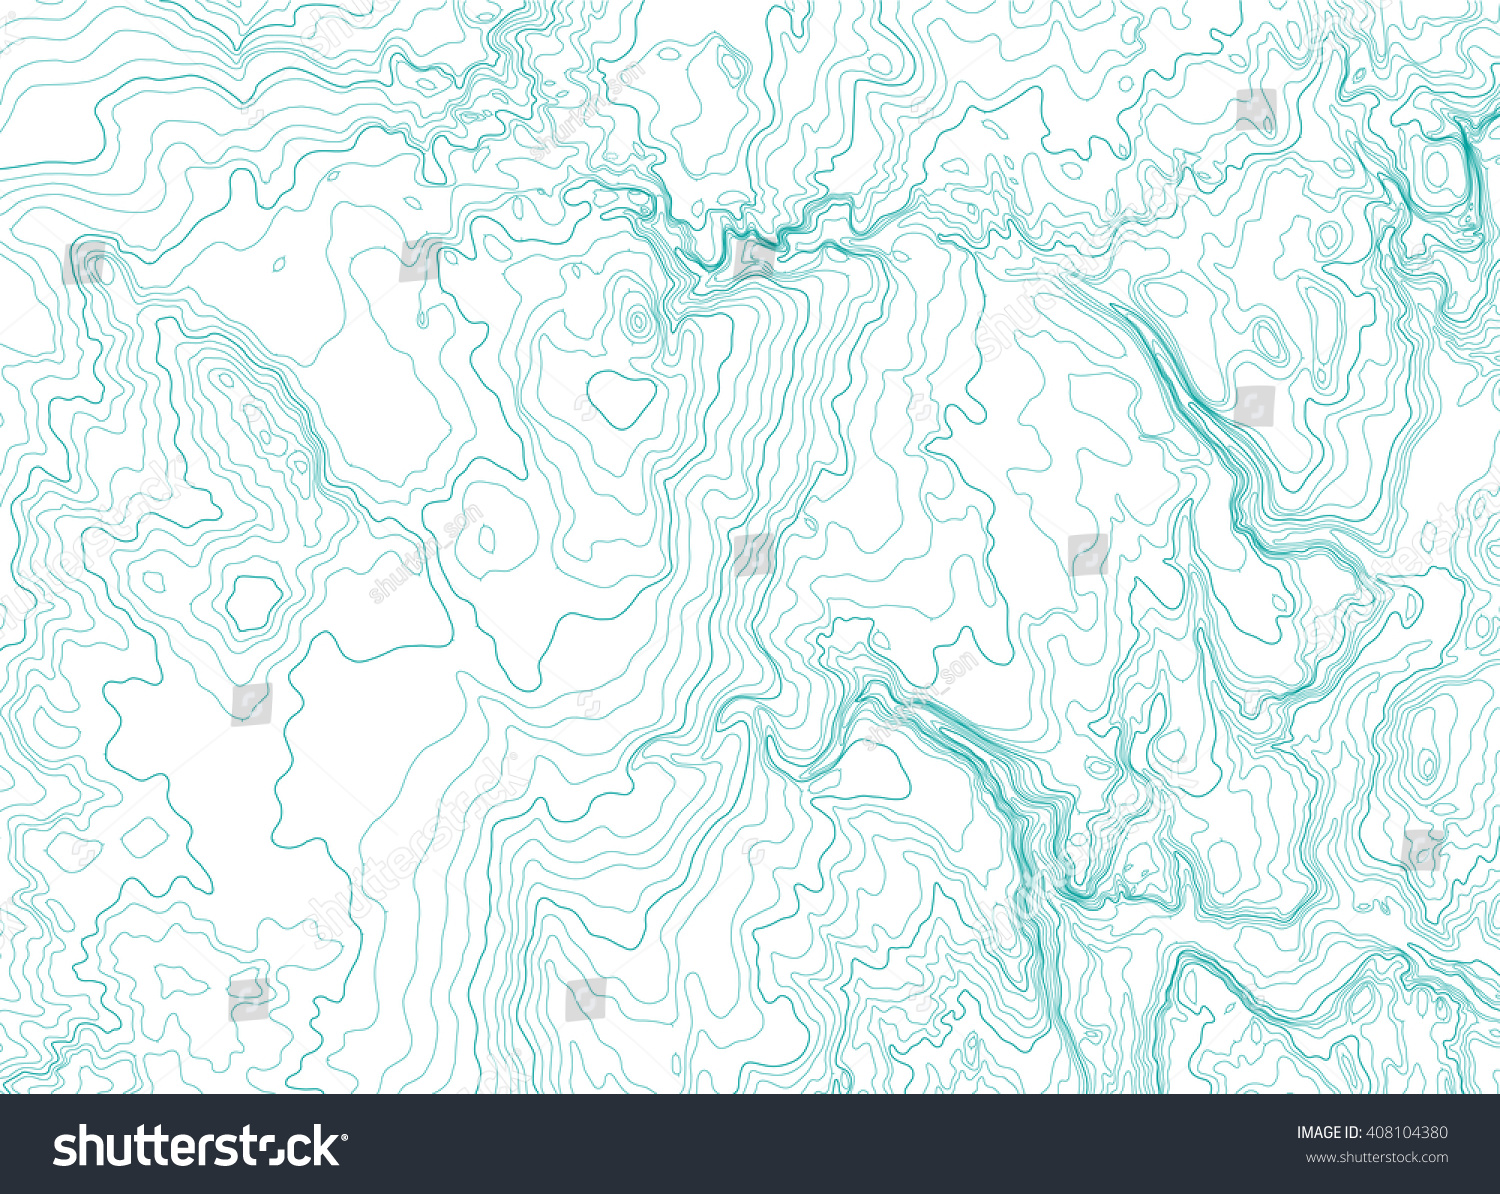 SVG of abstract topographic map, vector illustration svg